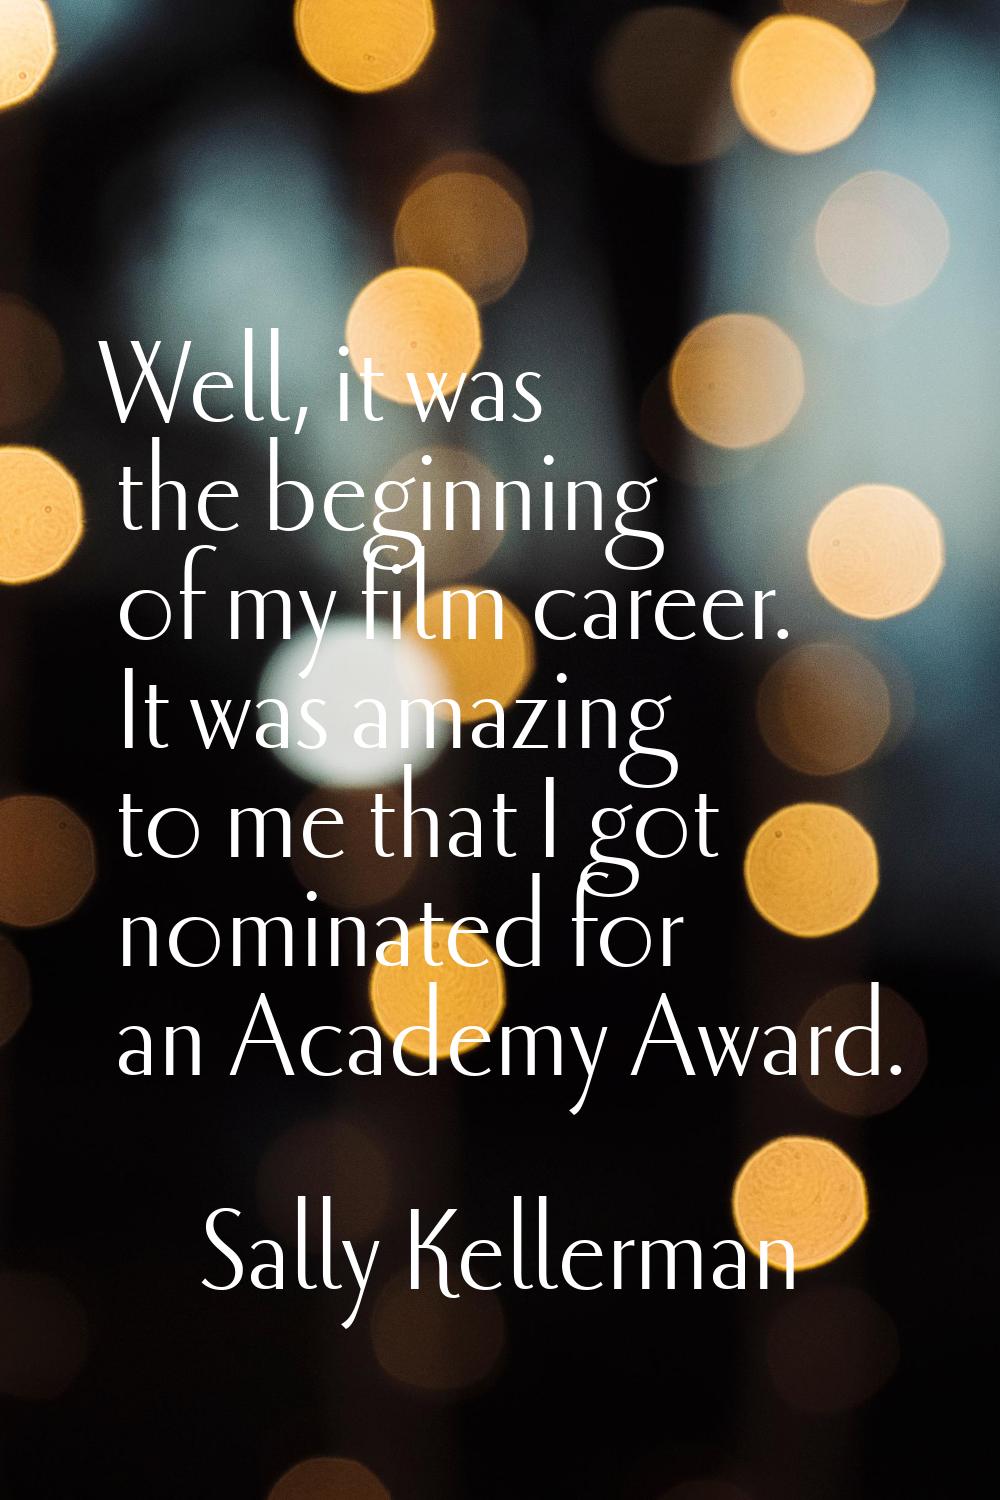 Well, it was the beginning of my film career. It was amazing to me that I got nominated for an Acad